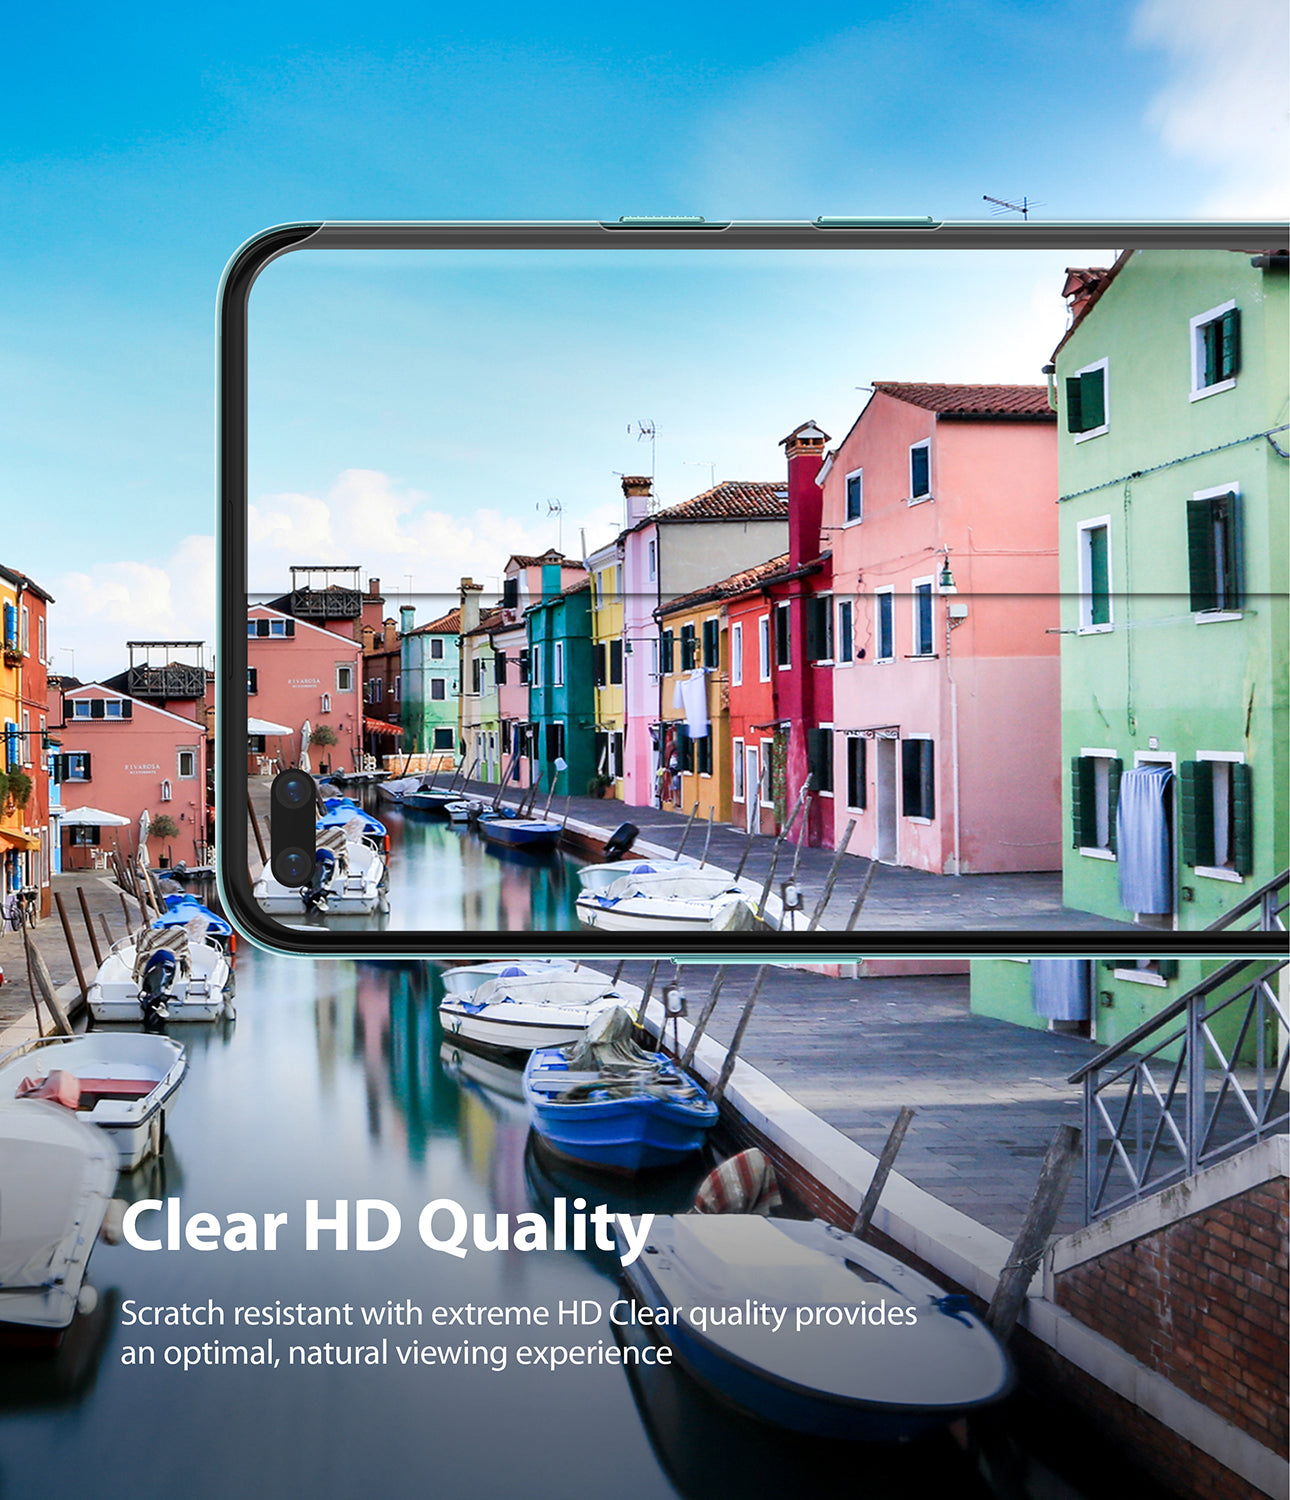 scratch resistant with extreme HD clear quality provides an optimal, natural viewing experience